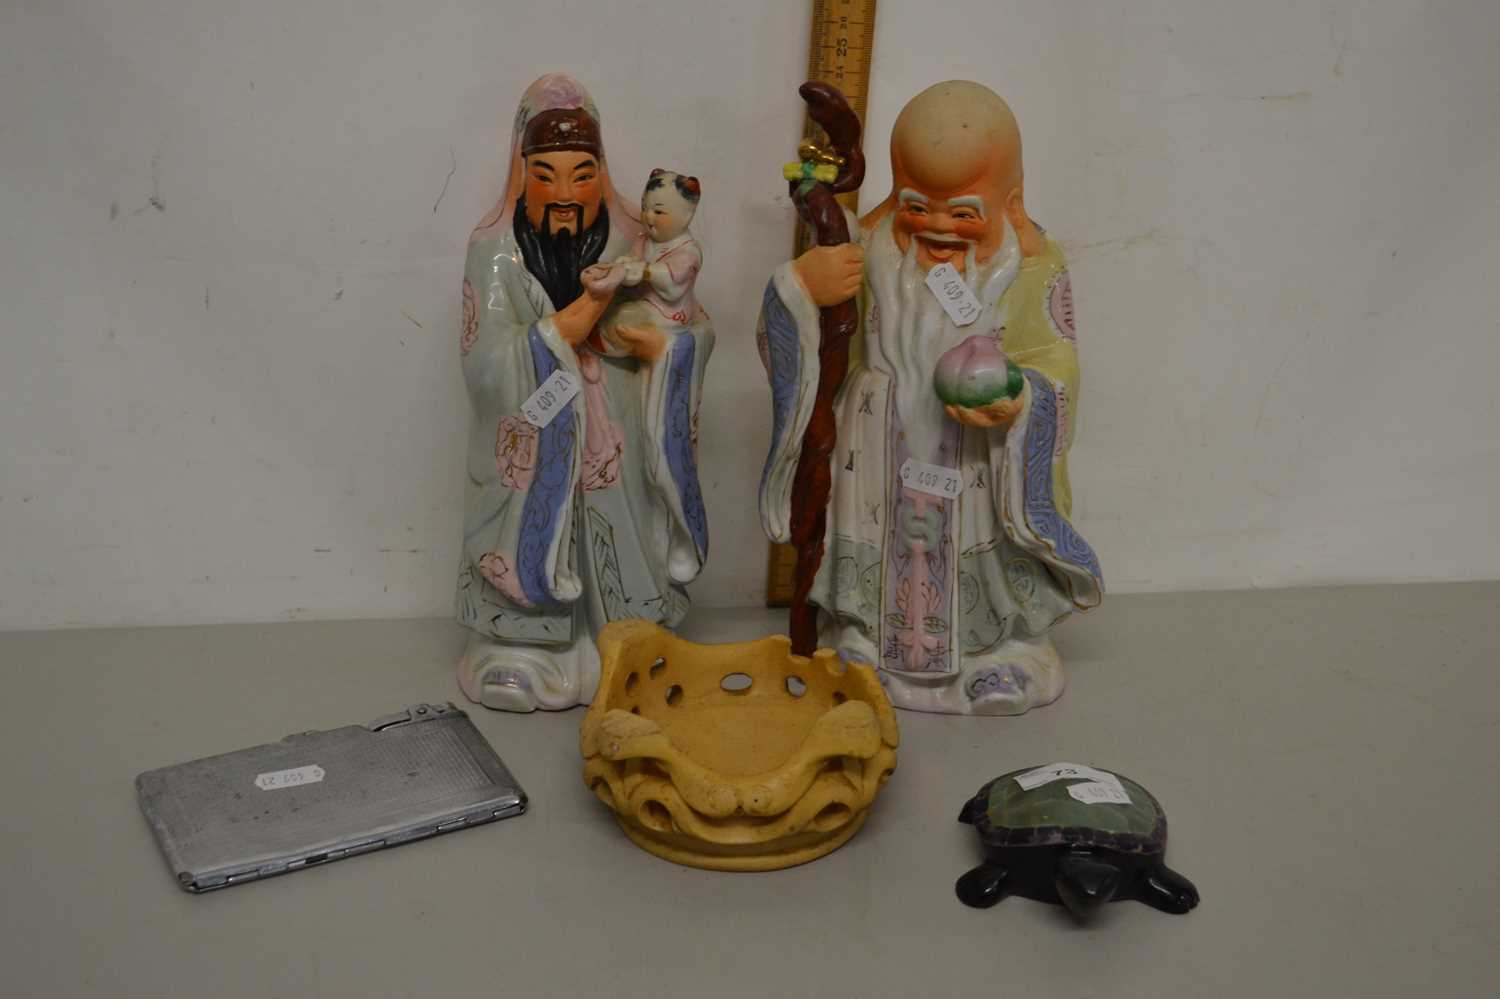 Mixed Lot: Pair of 20th Century Chinese figures, a vintage cigarette case, a polished stone turtle